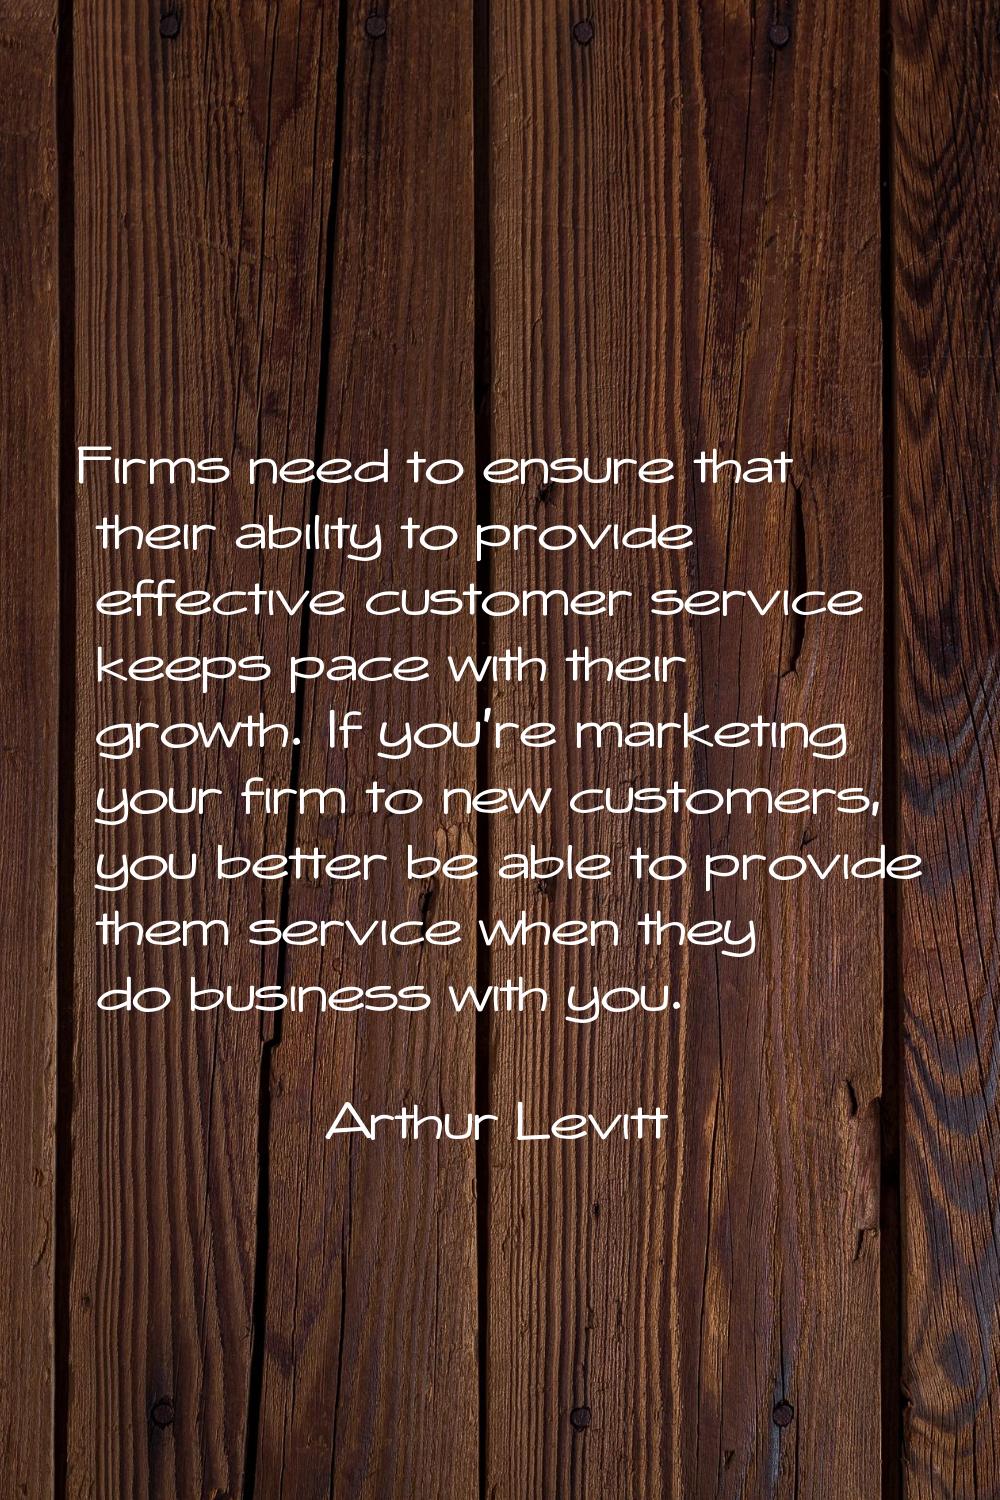 Firms need to ensure that their ability to provide effective customer service keeps pace with their